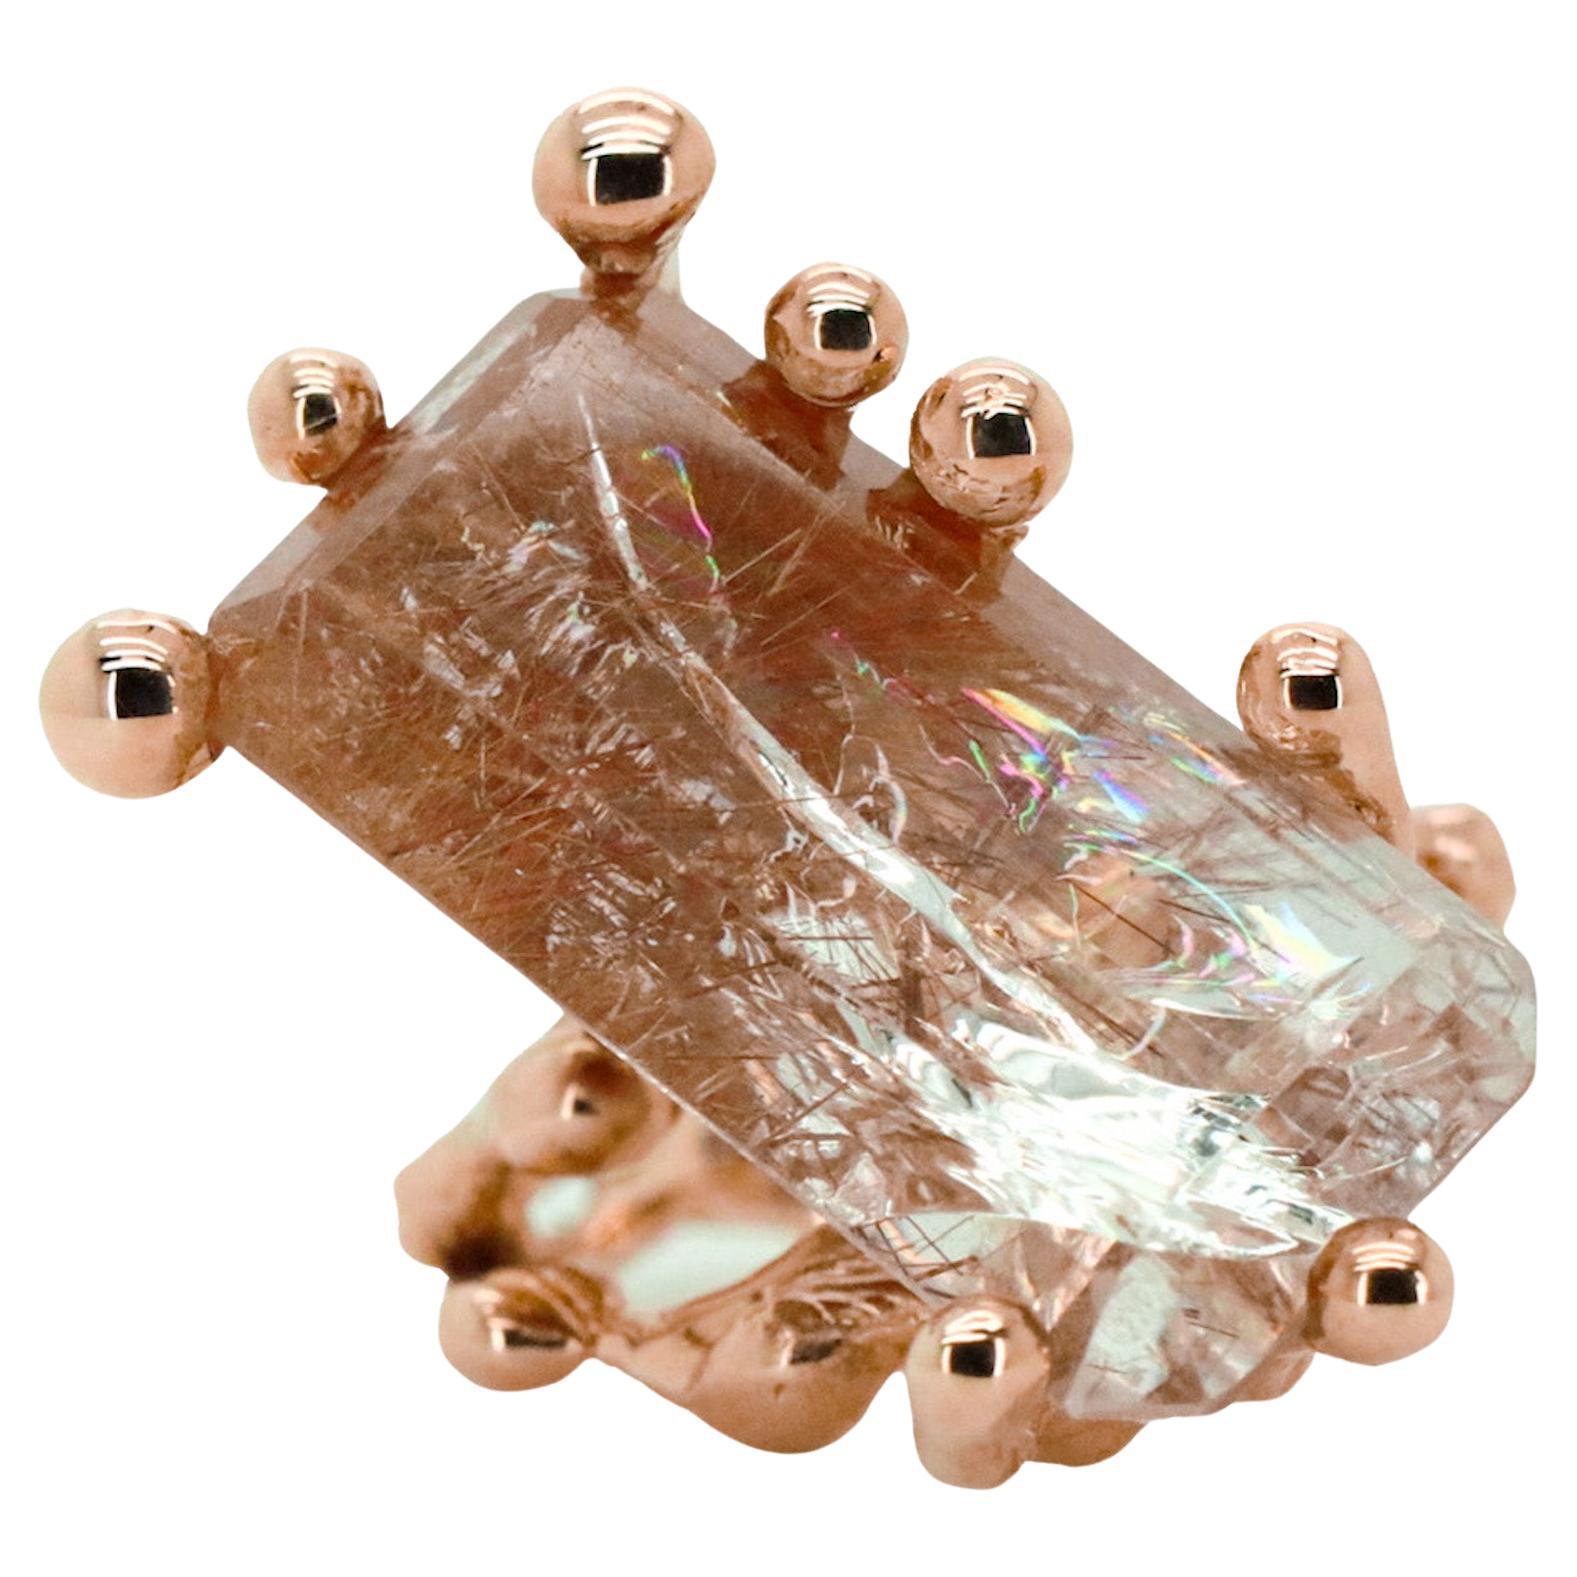 18K Rose Gold Made in Italy Unique Inclusion Rutilated Quartz Grounding Cocktail Ring.
Unlock Your Divine Potential with the Liliana ring. 
Gems and metal are energetically cleansed to emit their best vibrations.
One of a kind Liliana ring is made